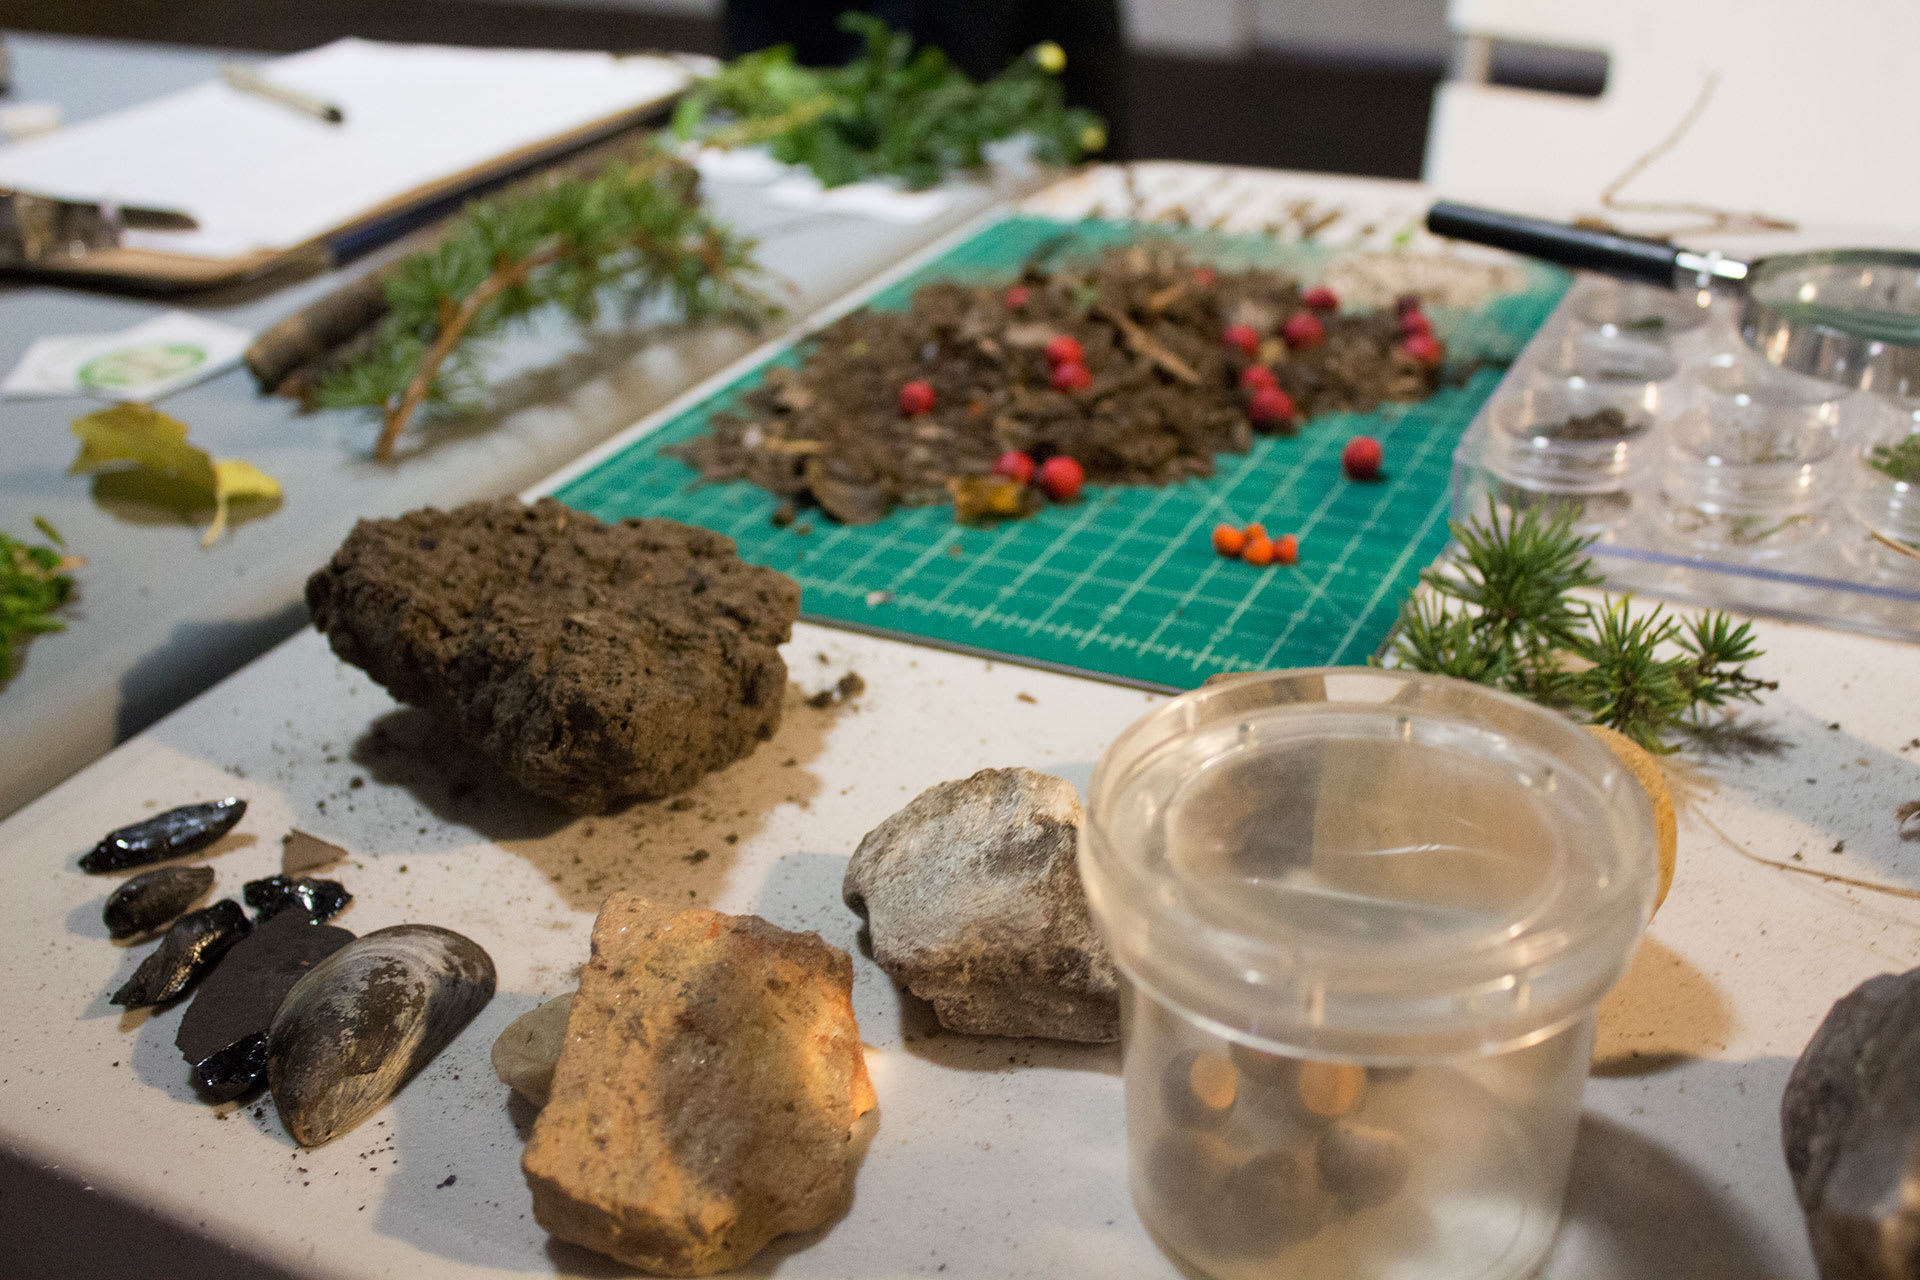 dirt, berries, and other natural specimens on a lab table